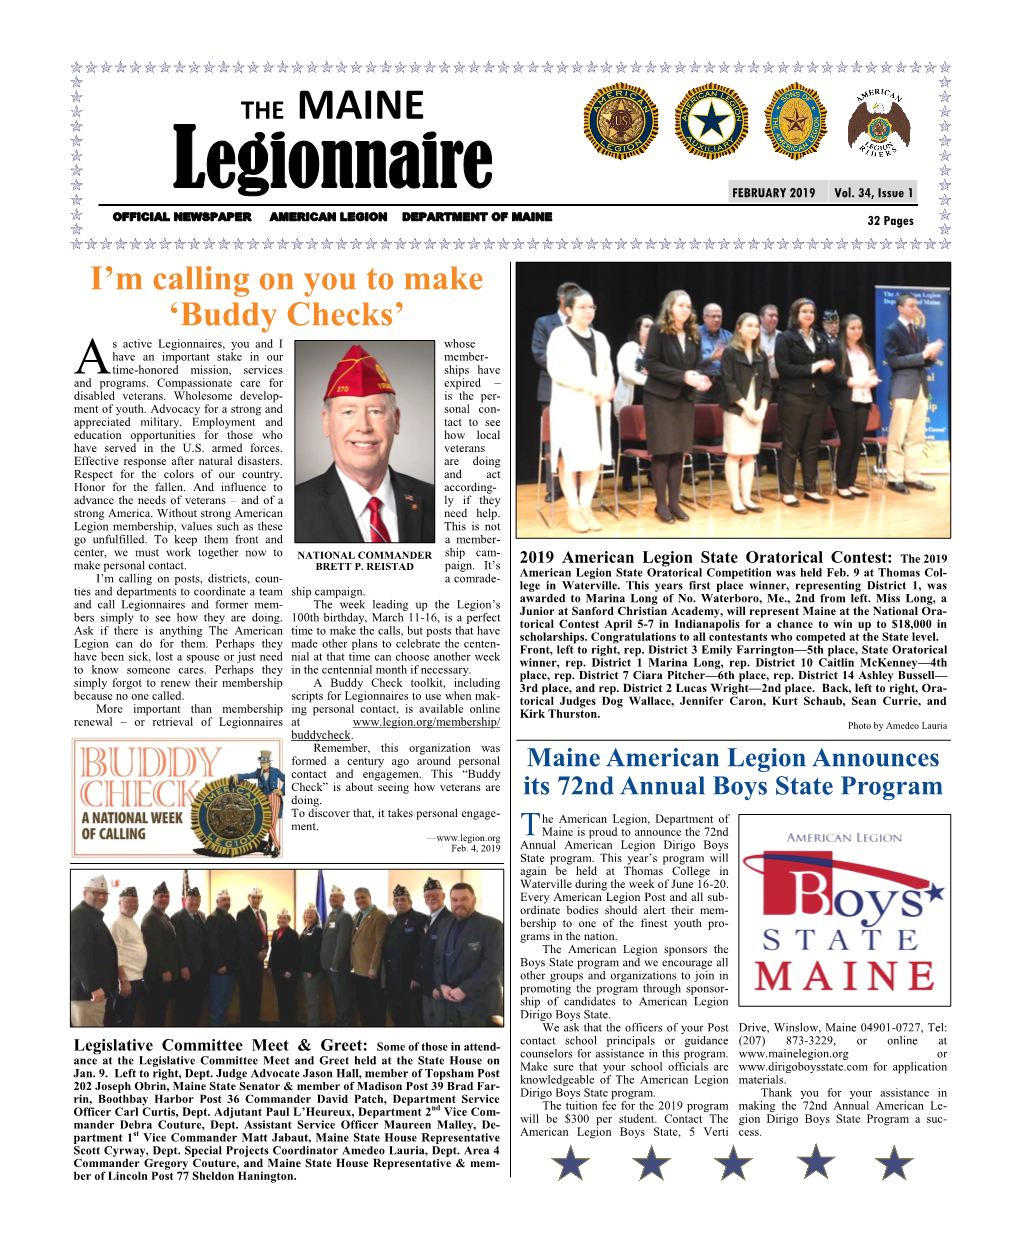 February 2019 Issue